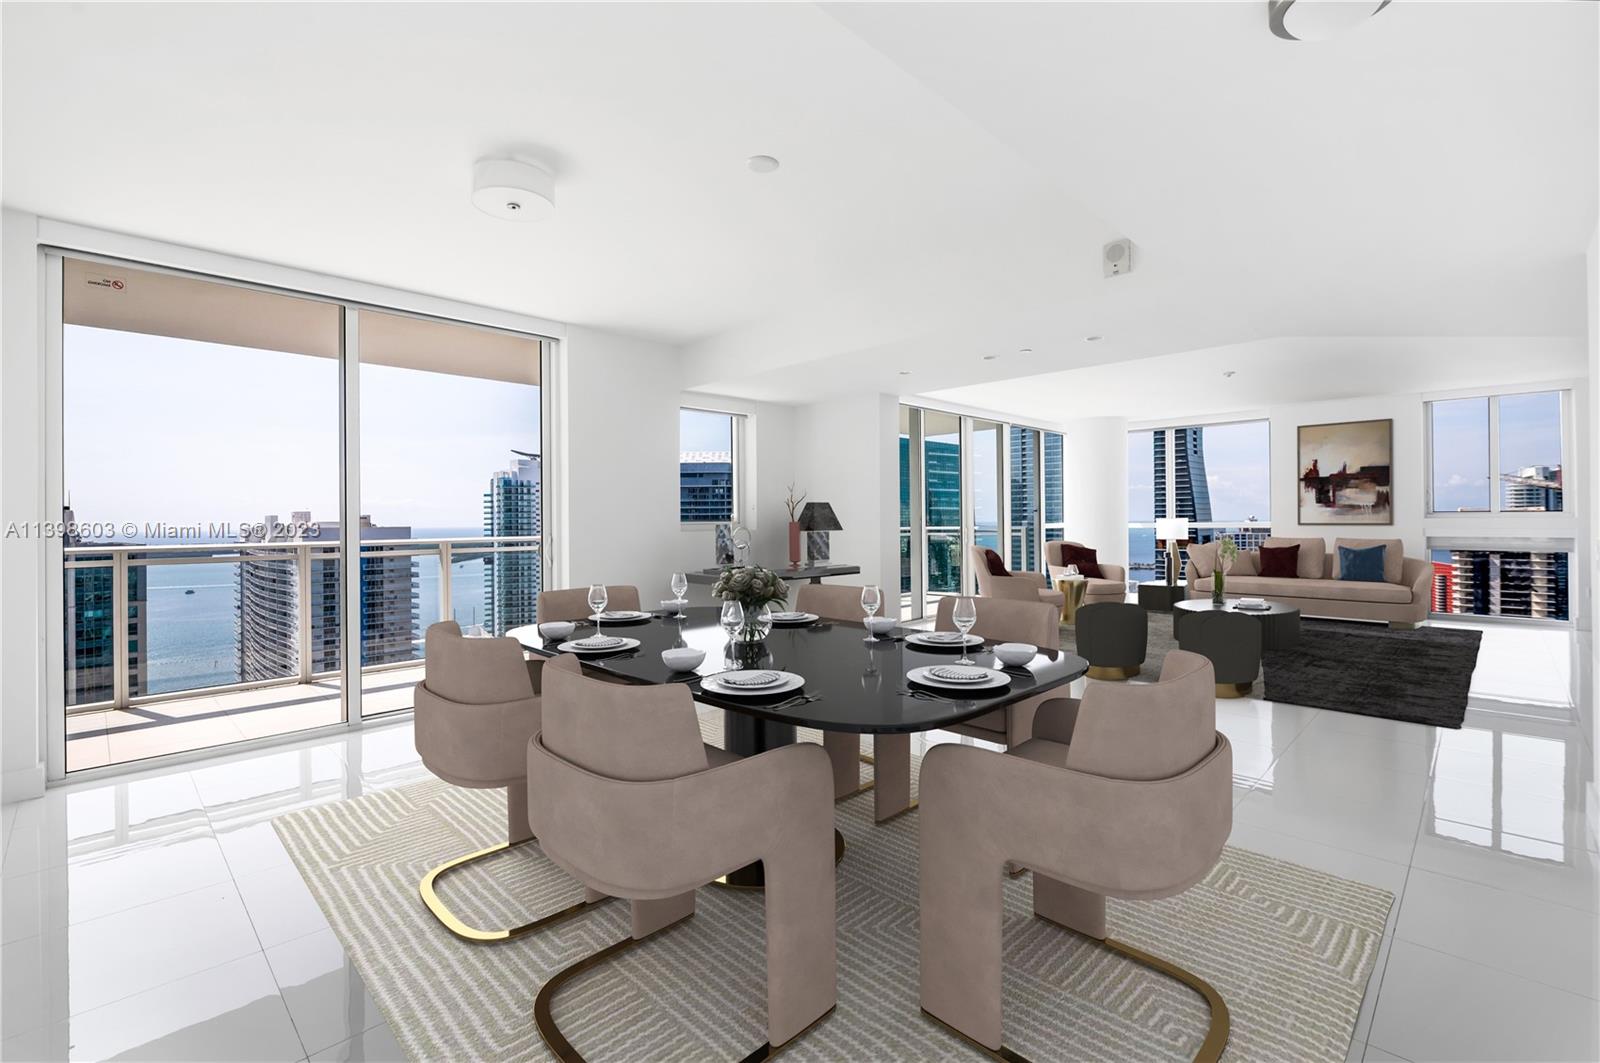 The Bond on Brickell with this exquisite combined 3900 and 3901 unit on the 39th floor. With 2,770 square feet, 4 bedrooms, 4 full bathrooms, and 1 half bathroom, this residence offers an abundance of space and comfort.
Enjoy a open floor plan that effortlessly connects the living, dining, and kitchen areas. Floor-to-ceiling windows provide breathtaking views of the Miami skyline. 
Residents of The Bond on Brickell have access to exclusive amenities, including a state-of-the-art fitness center, a stunning pool deck, and a business center. The prime location in the vibrant Brickell neighborhood provides easy access to fine dining, upscale shopping, and vibrant nightlife.
Don't miss the opportunity to own this exceptional unit at The Bond on Brickell. THIS UNIT IS RENTED UNTIL DEC. 2024